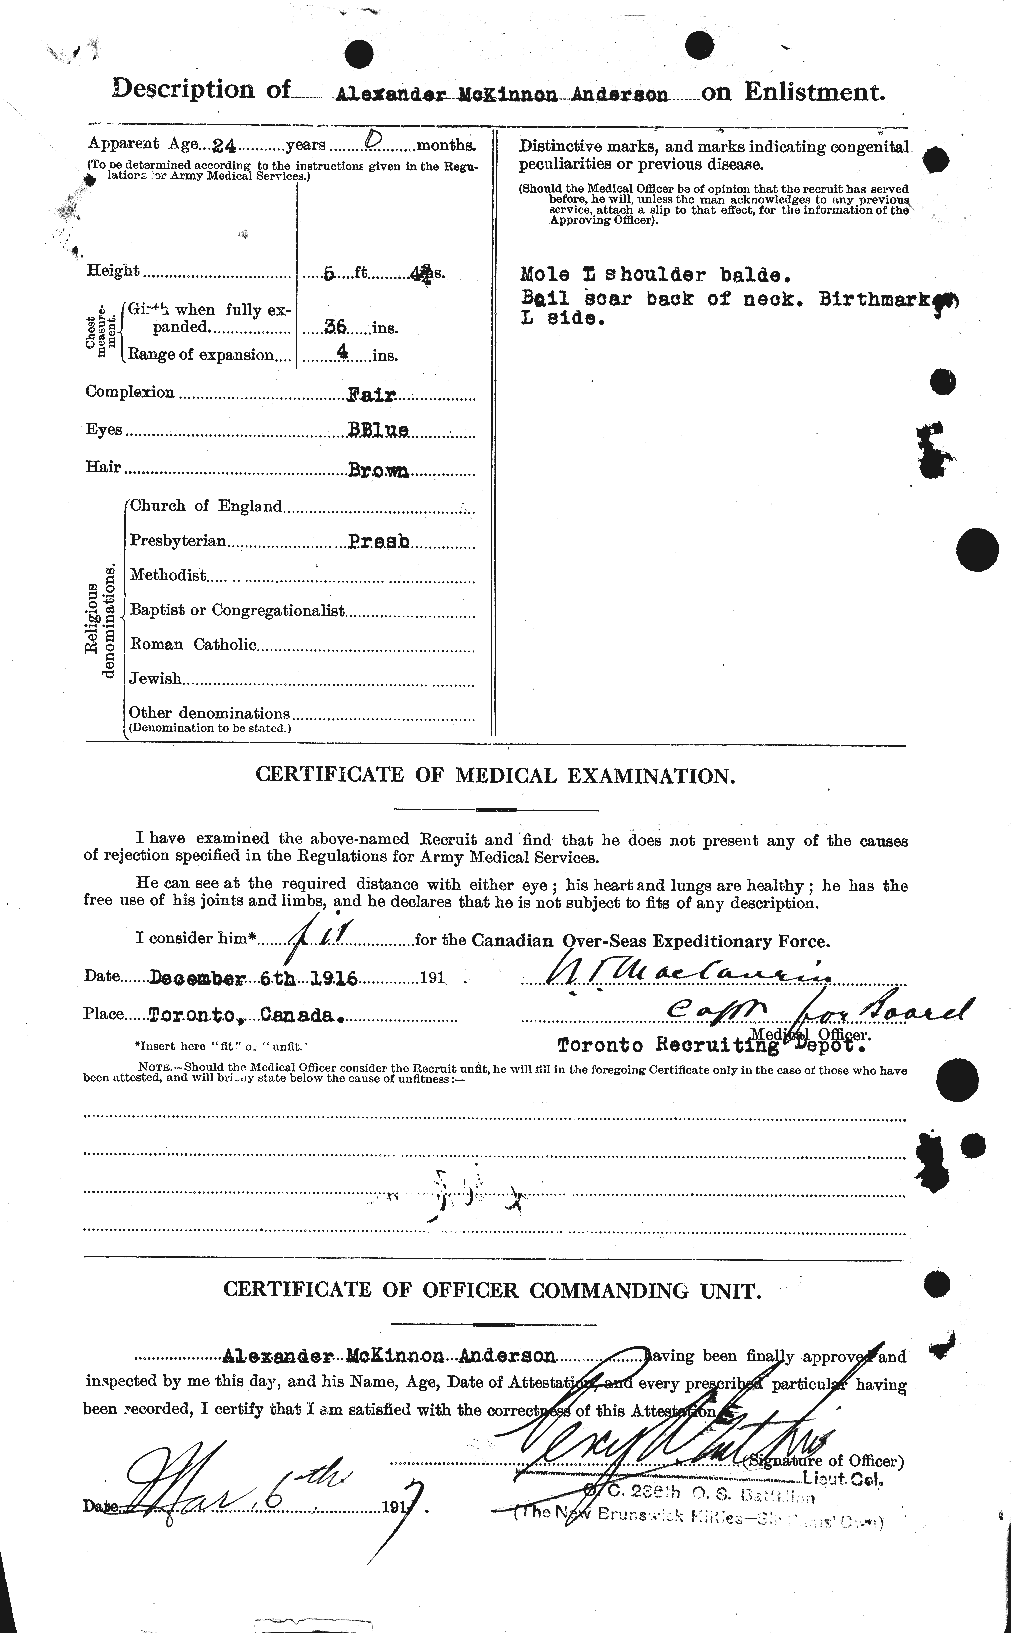 Personnel Records of the First World War - CEF 209478b